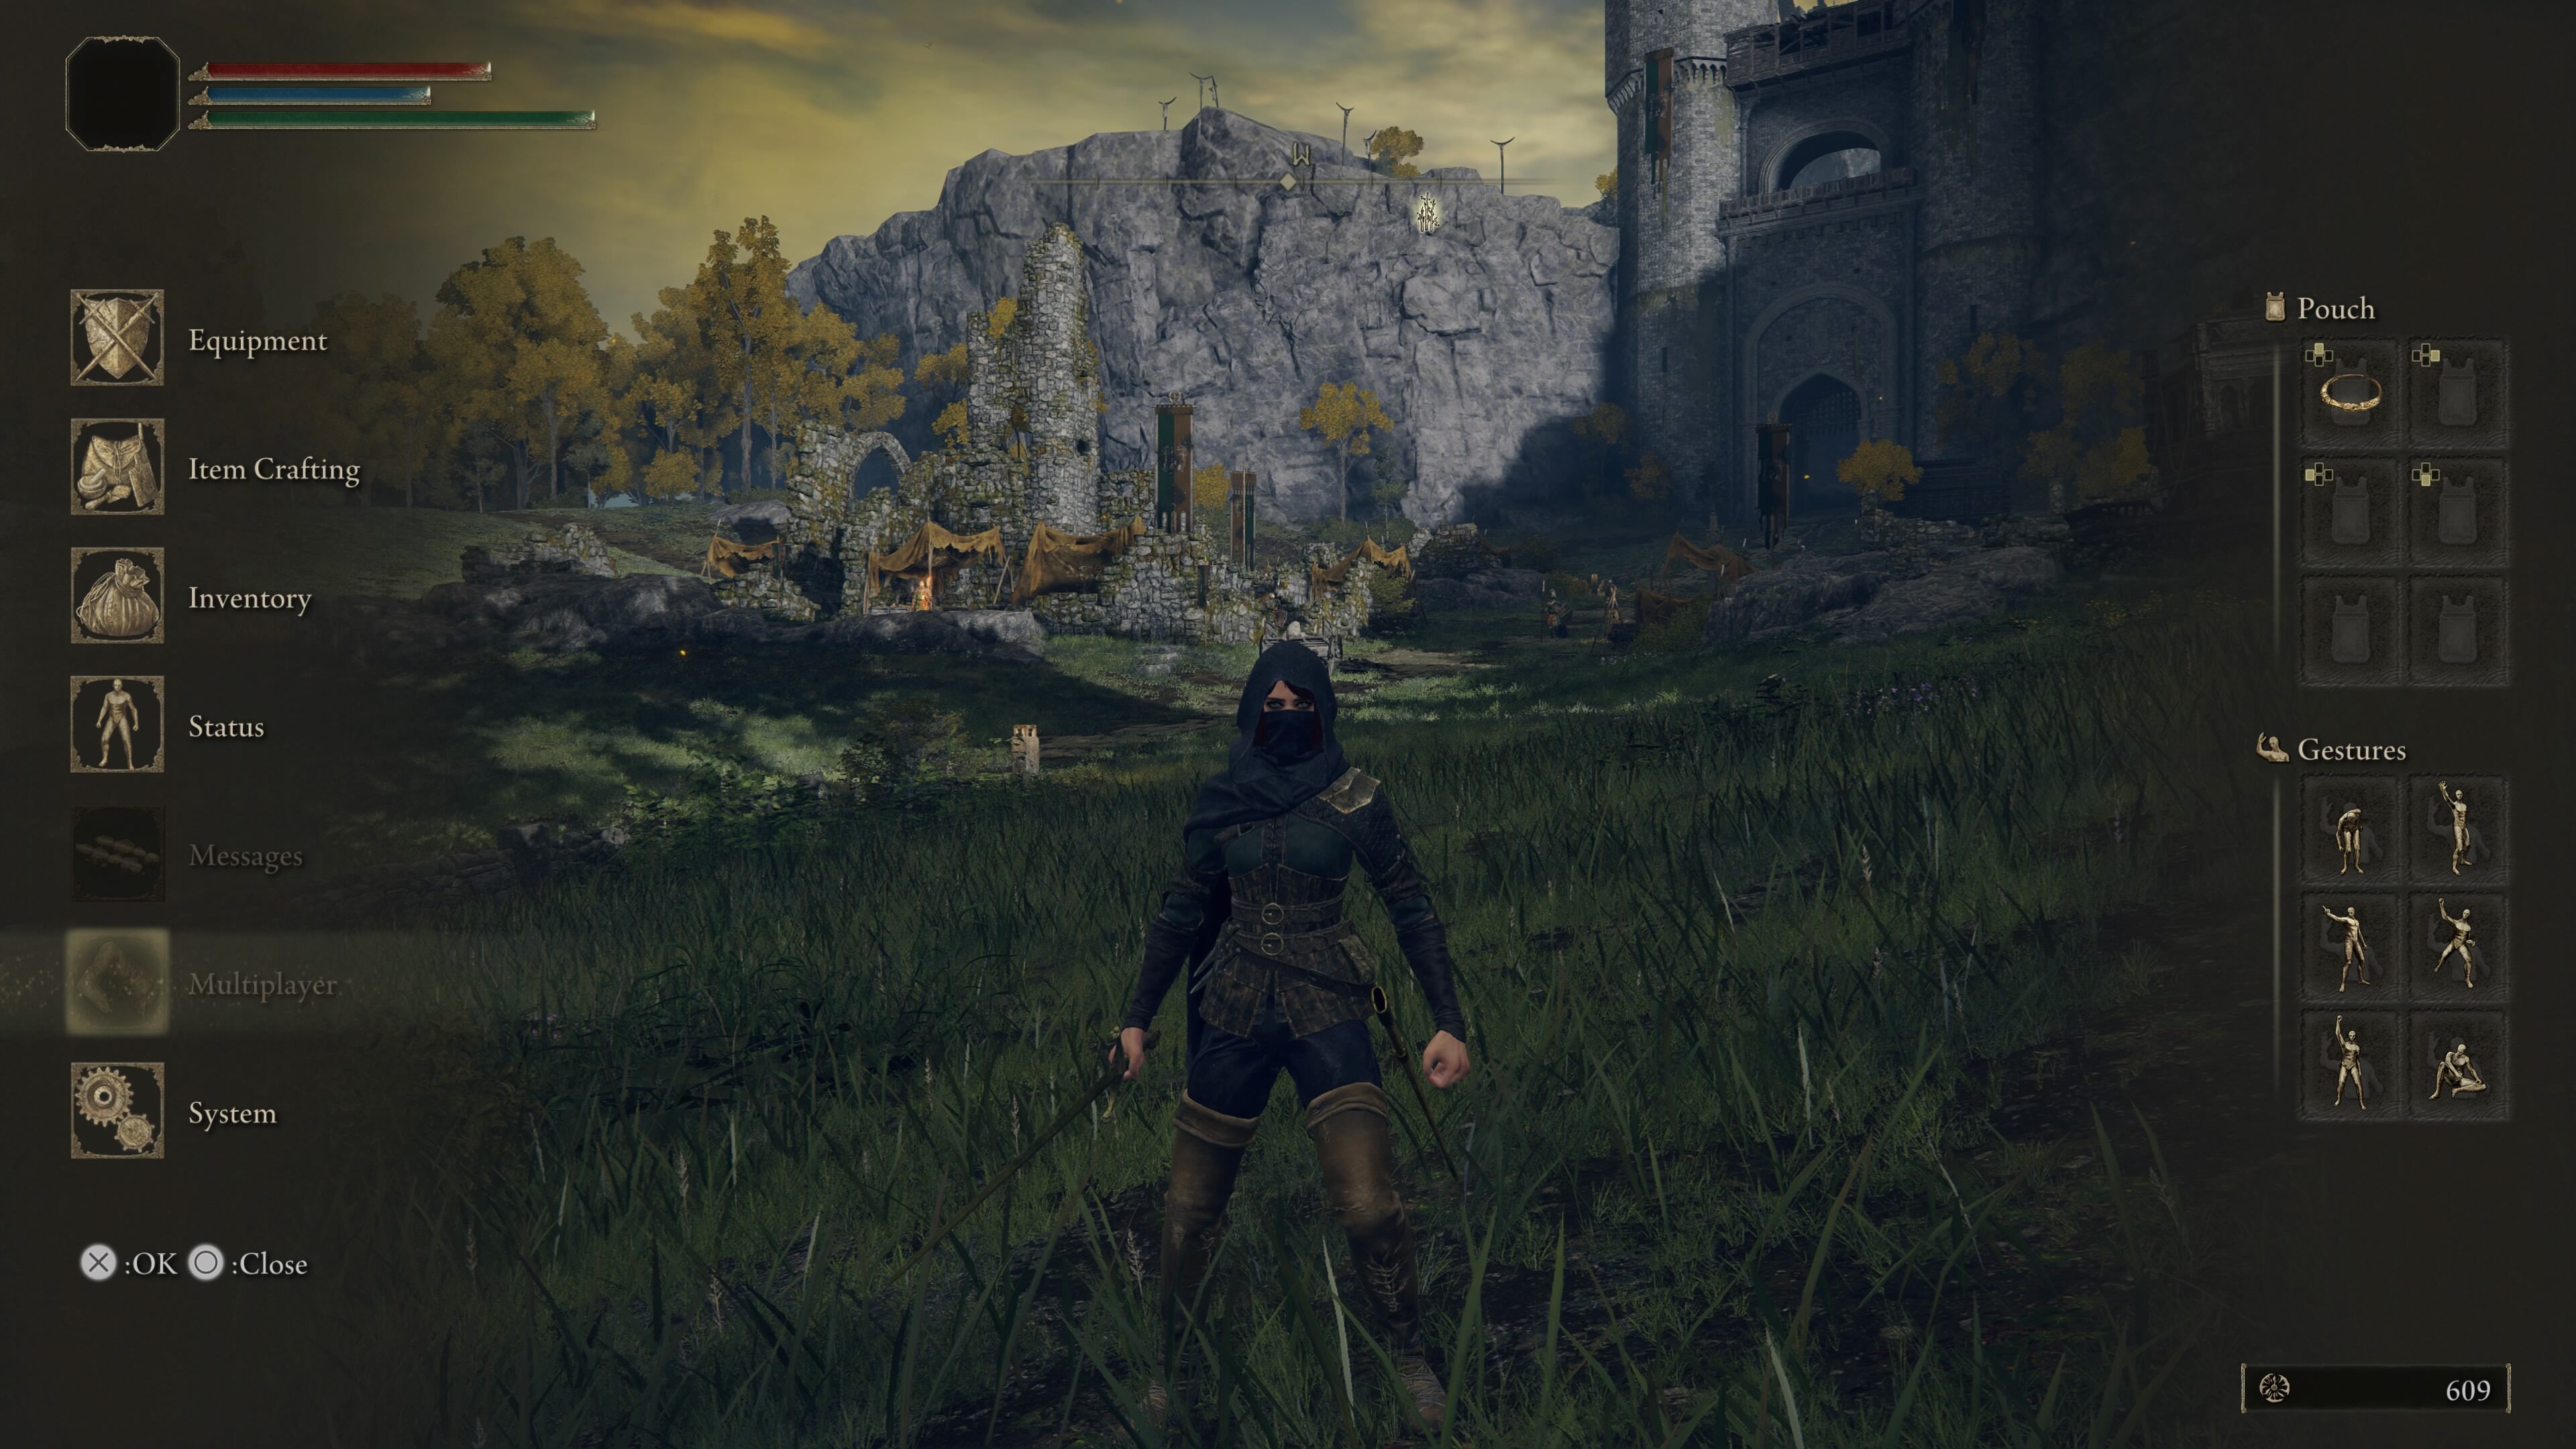 elden ring multiplayer - a character wearing a black hood stands in a green field